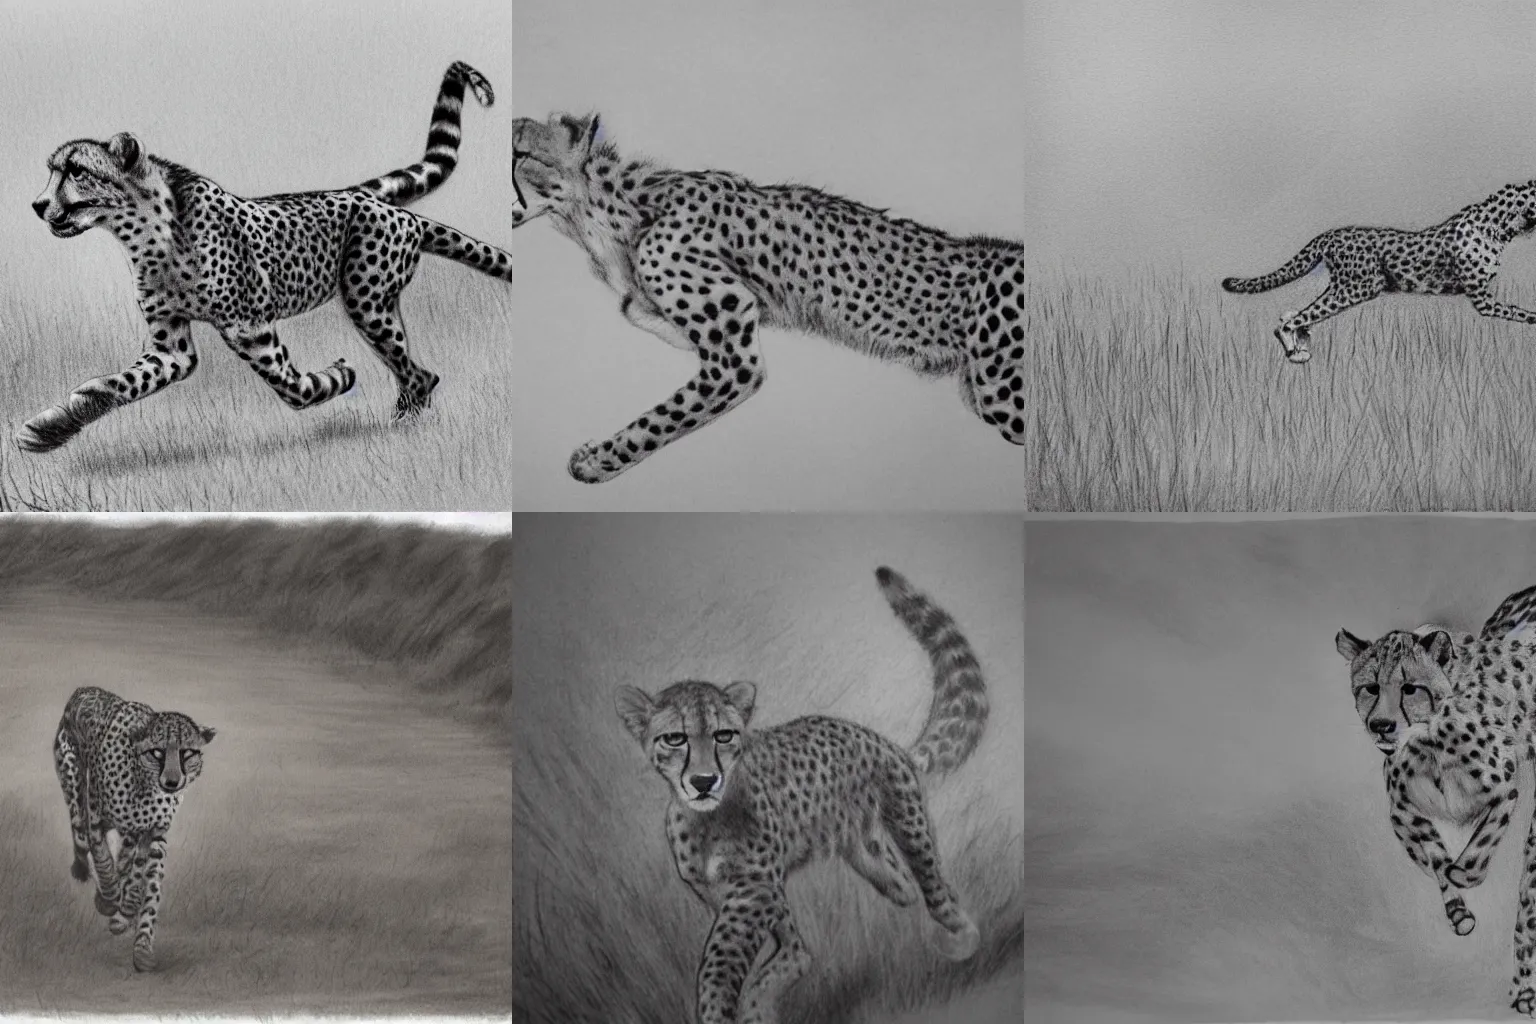 How to Draw a Cheetah - Realistic Pencil Drawing - YouTube | Cheetah drawing,  Pencil drawings, Cat drawing